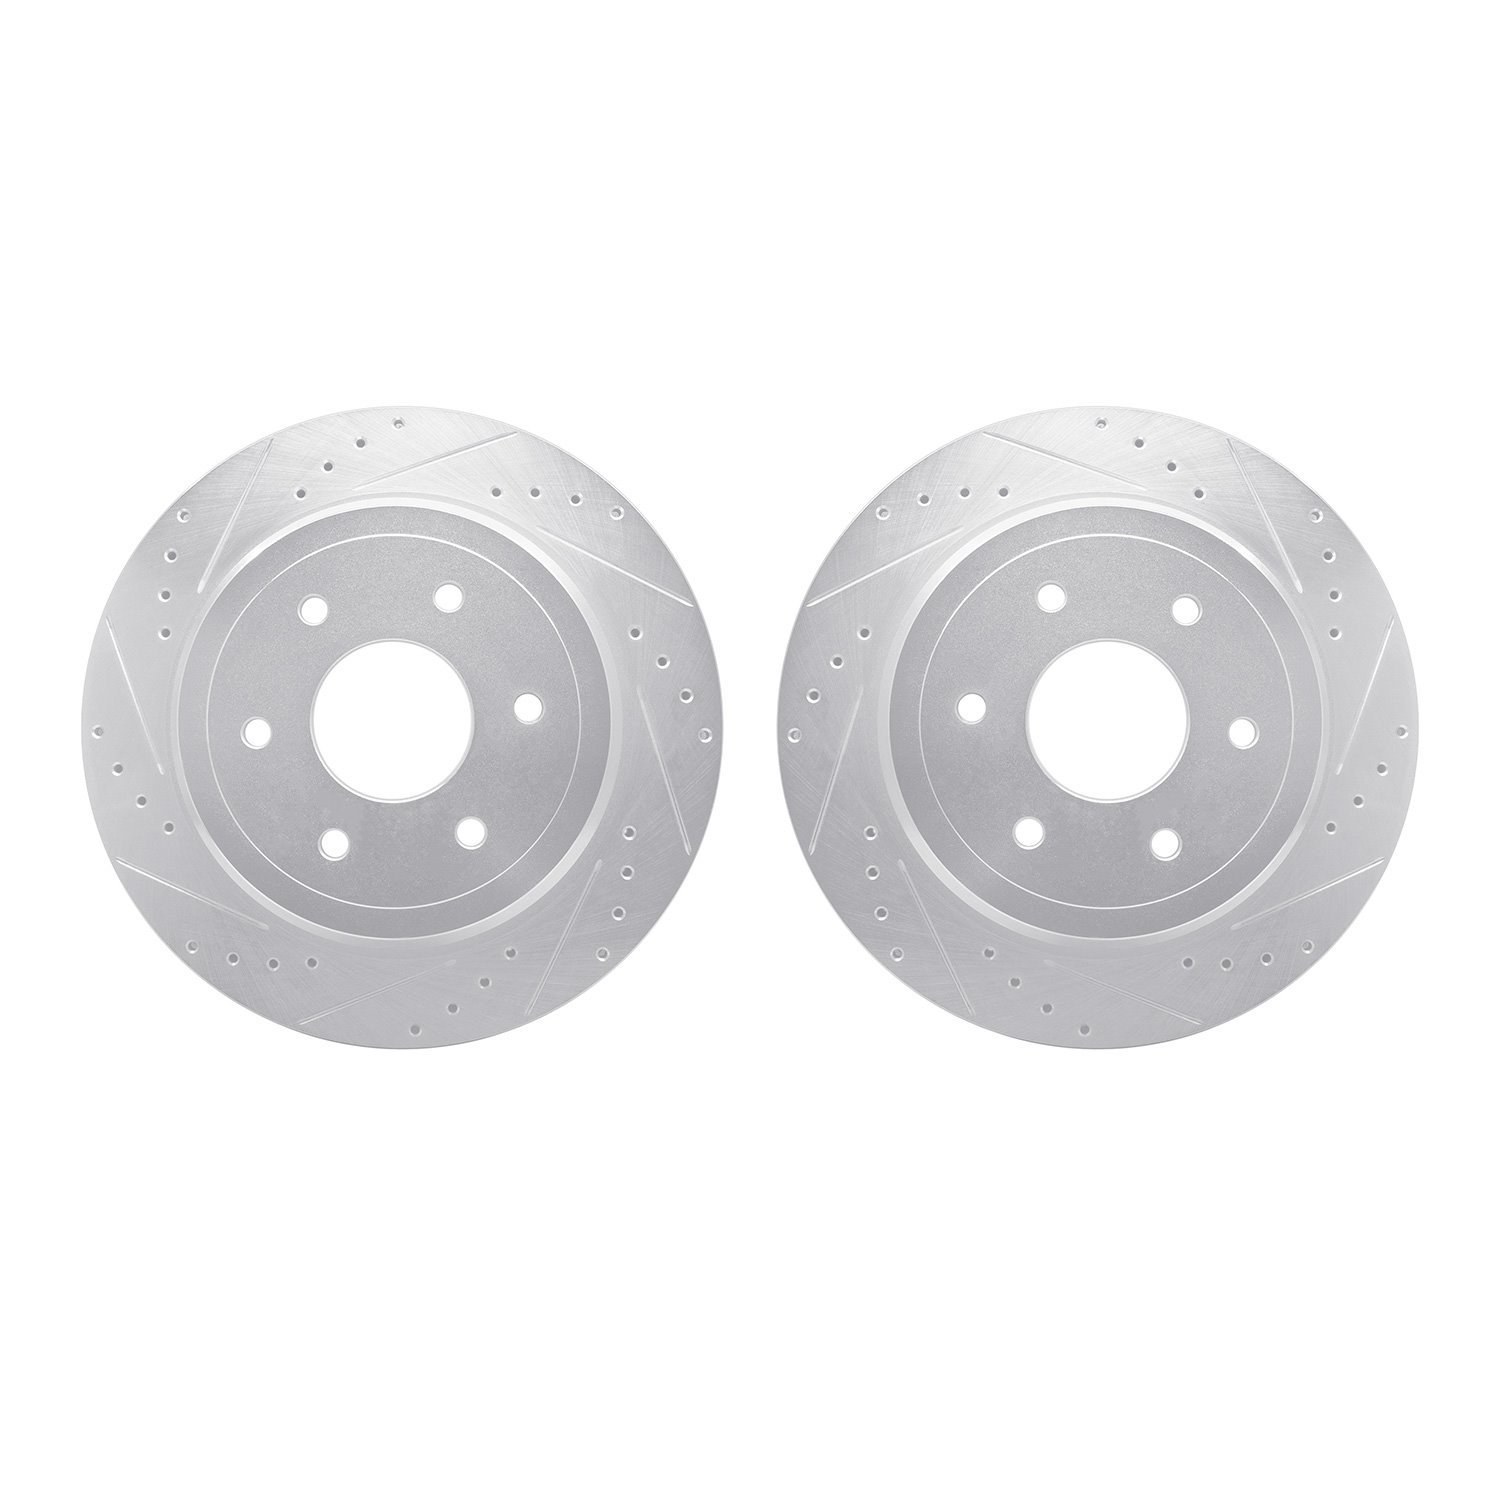 7002-67108 Drilled/Slotted Brake Rotors [Silver], Fits Select Infiniti/Nissan, Position: Rear